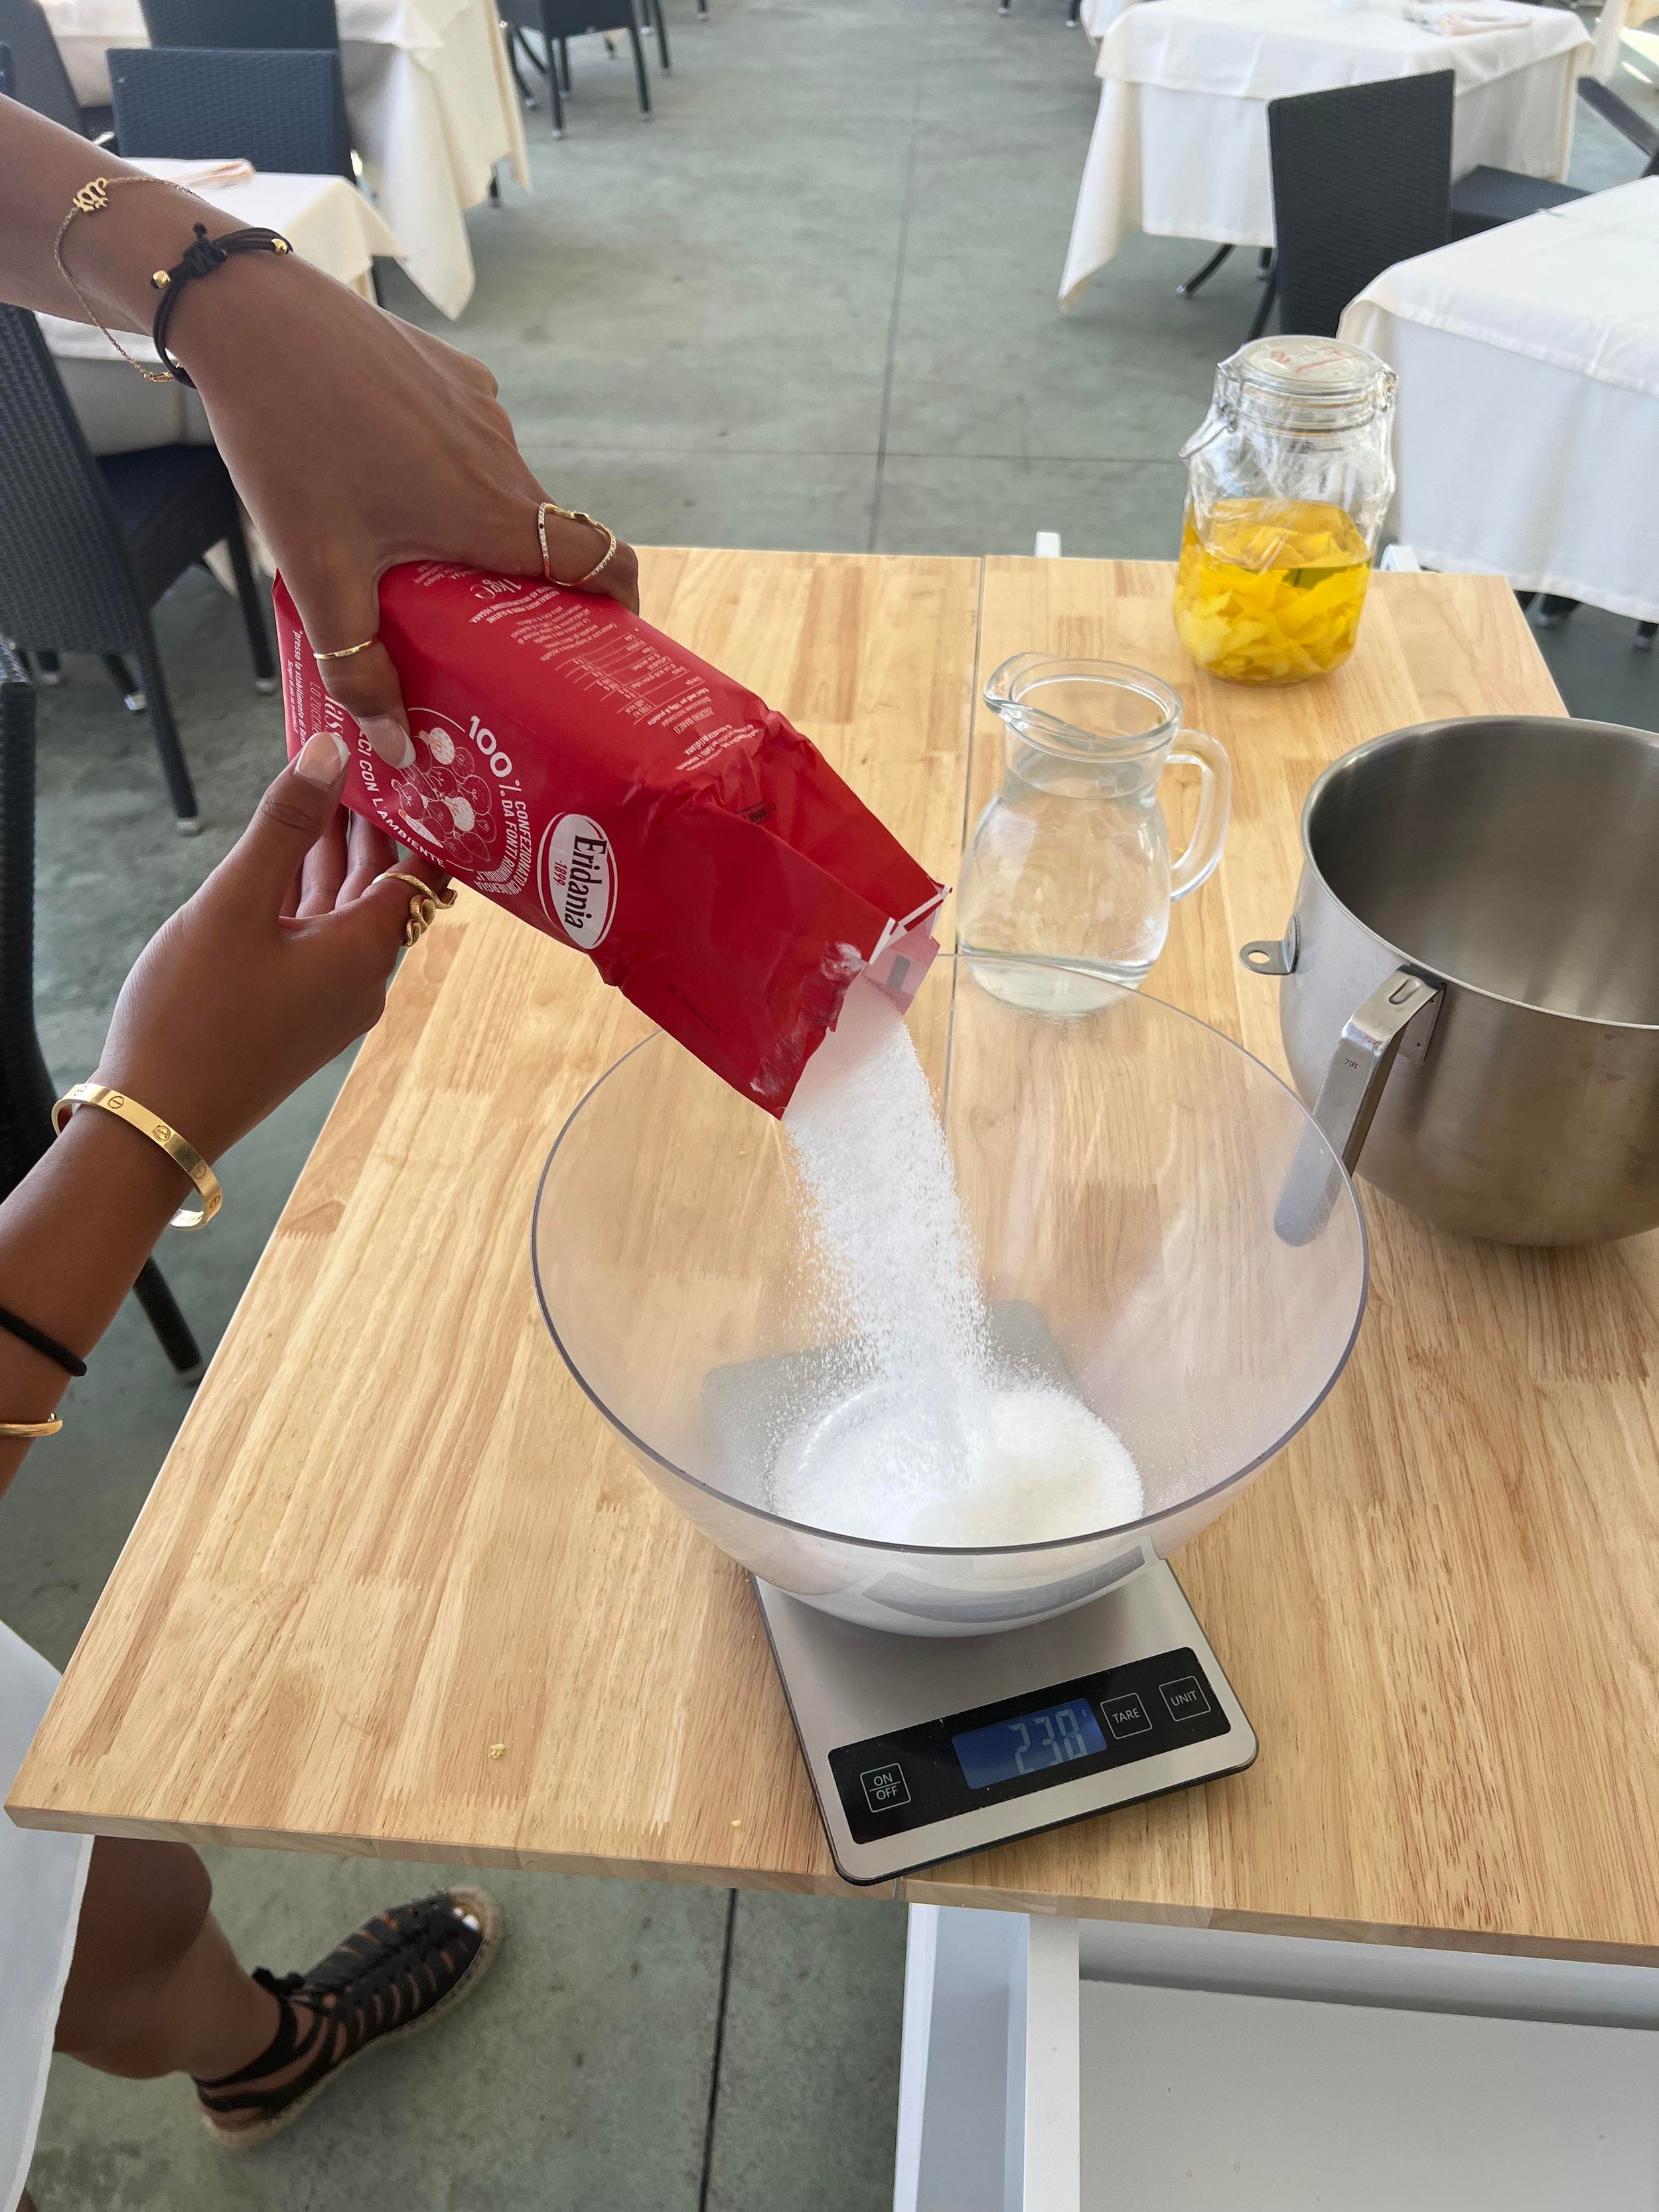 Measure out 700g of Sugar (Copy)